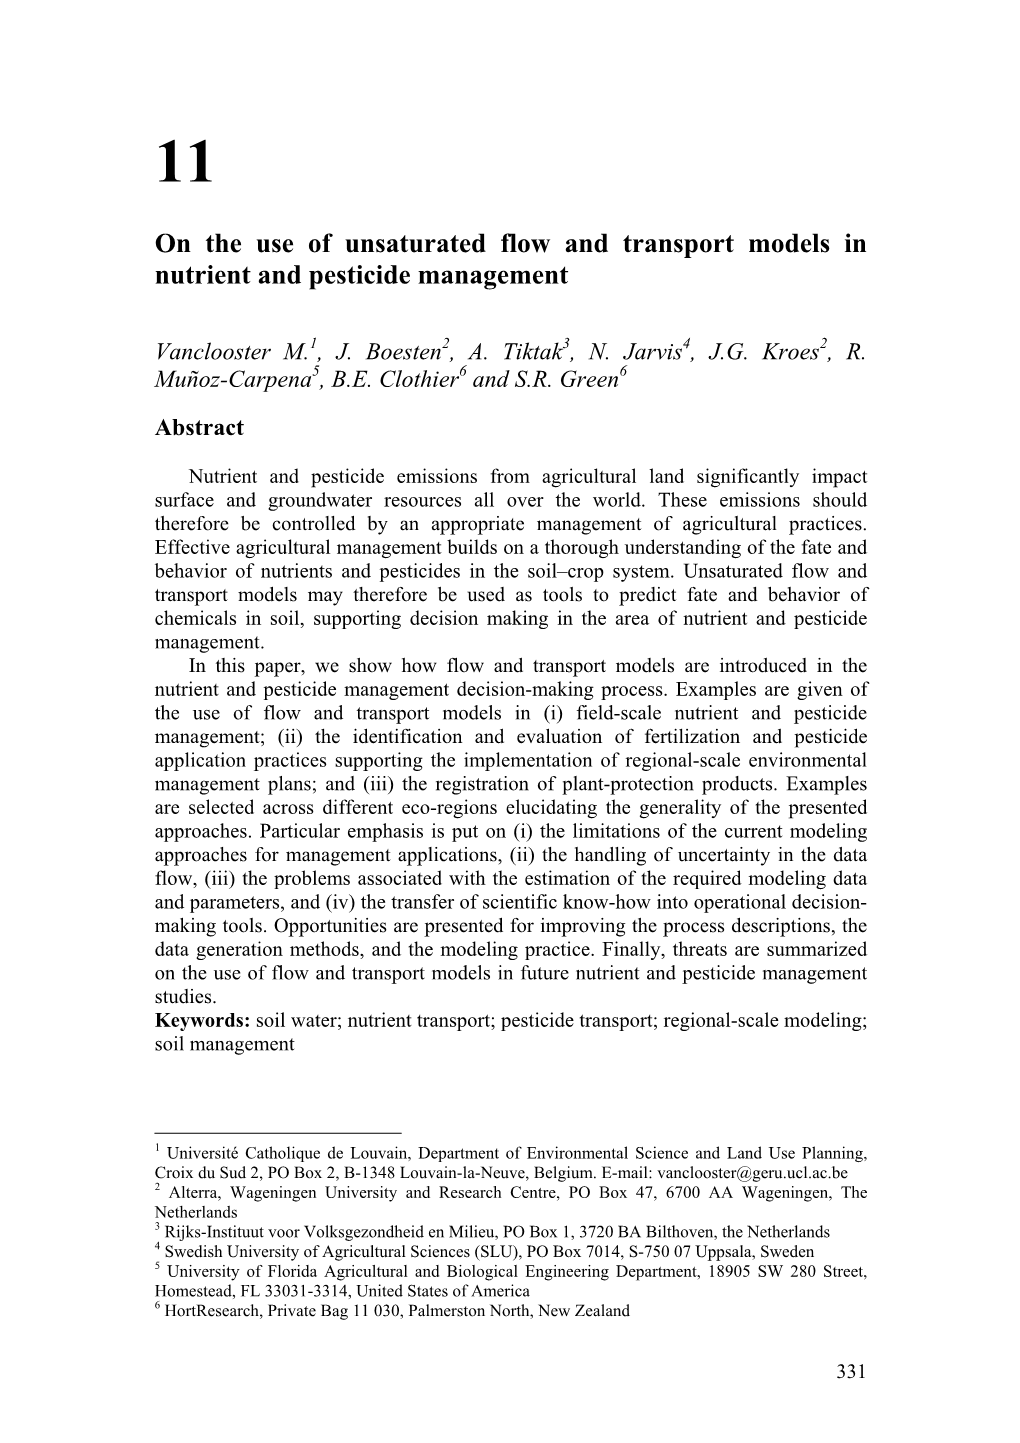 On the Use of Unsaturated Flow and Transport Models in Nutrient and Pesticide Management